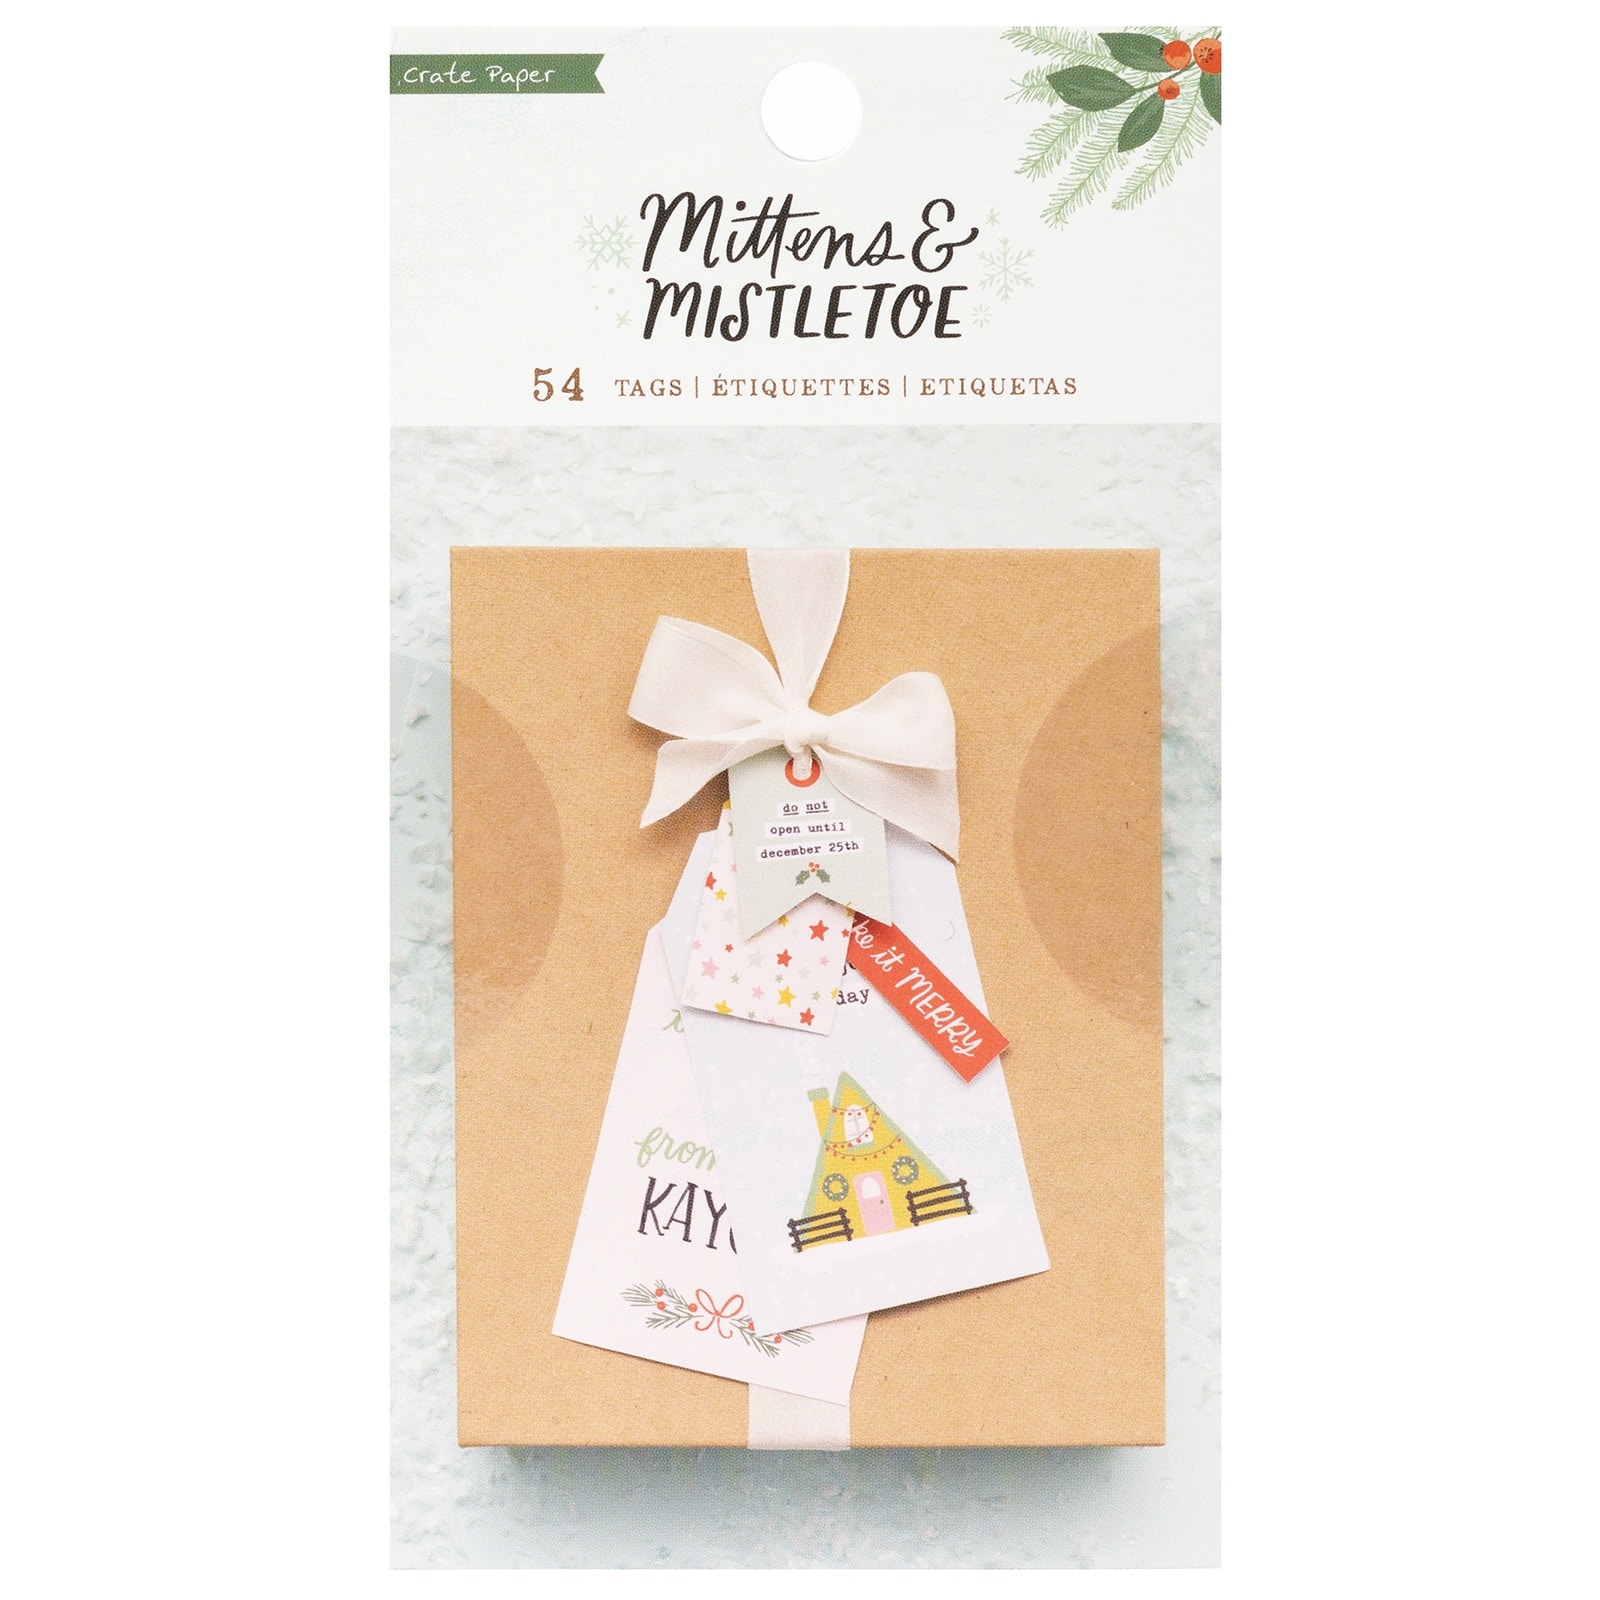 Crate Paper Mittens &#x26; Mistletoe Book of Tags